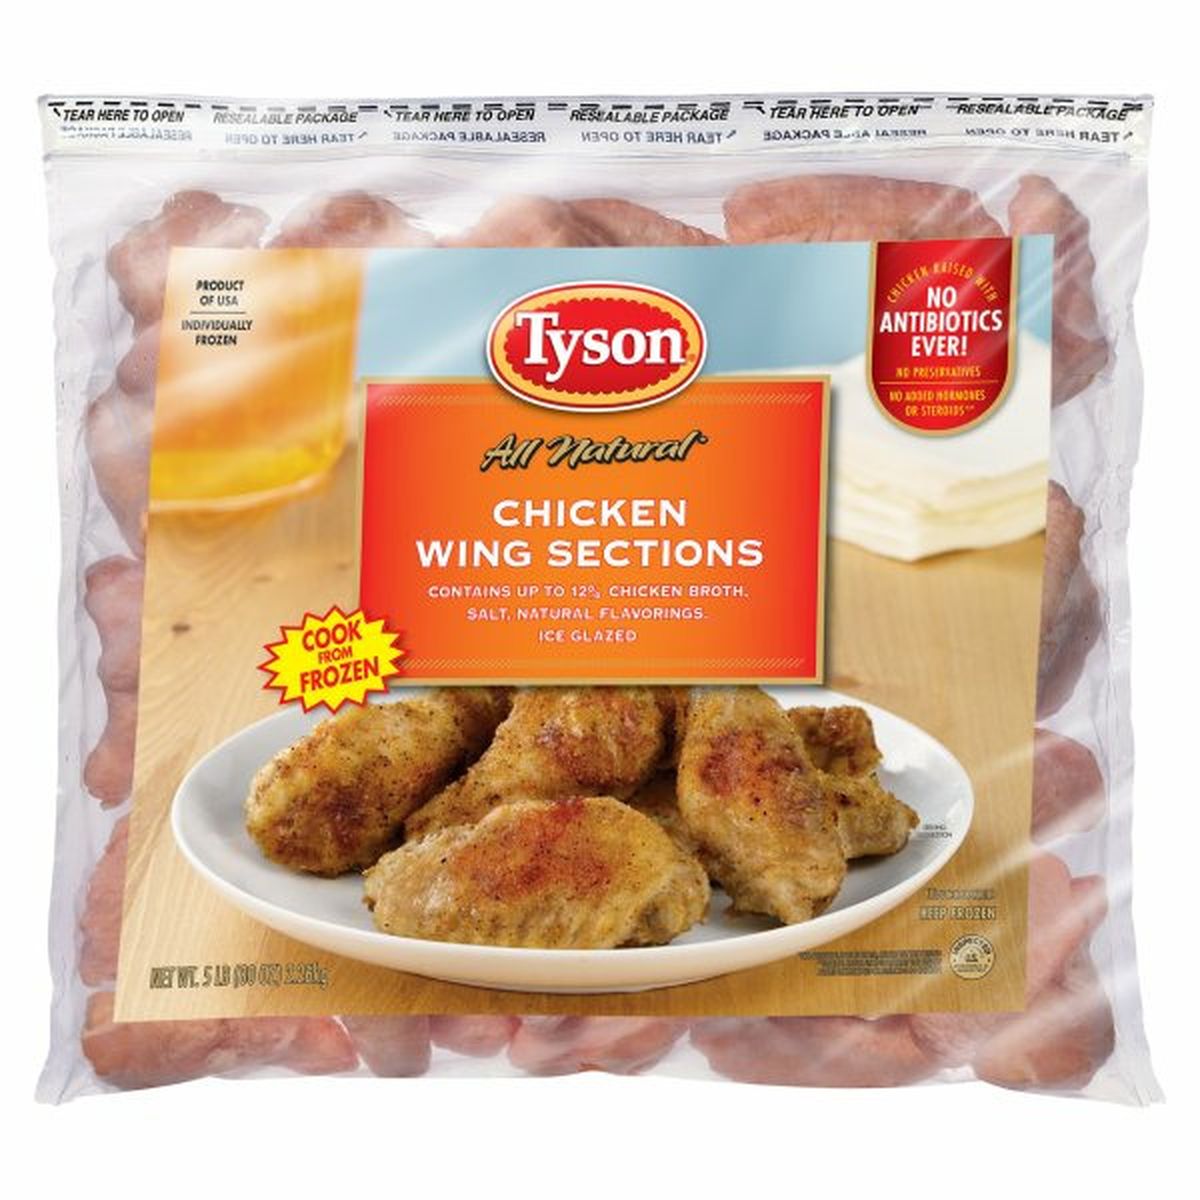 Calories in Tyson Chicken Wing Sections